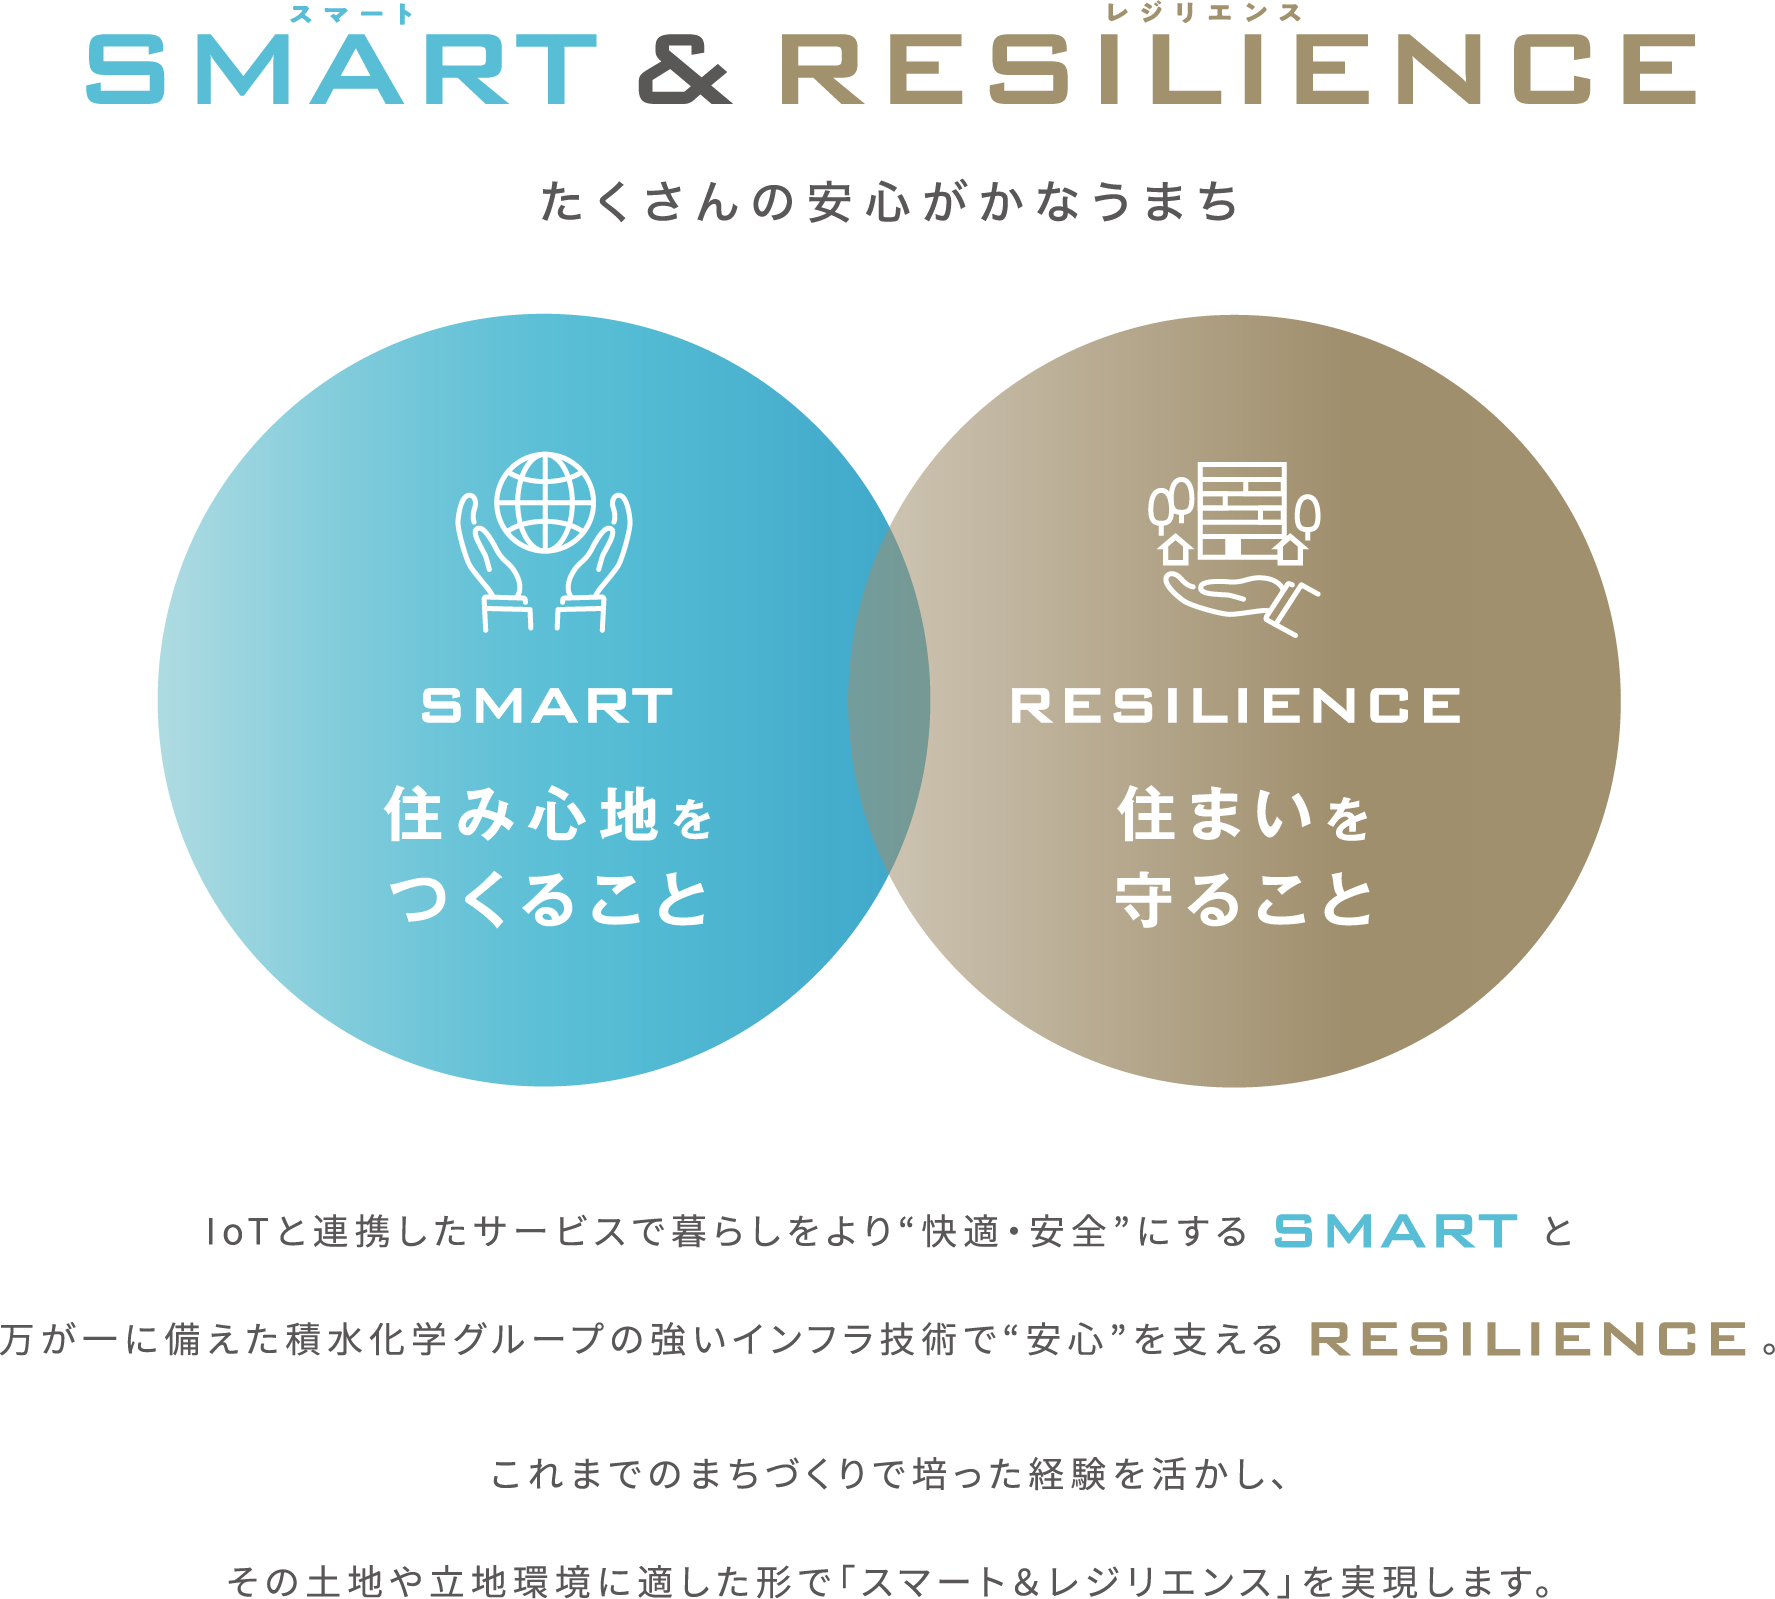 smart & resilience